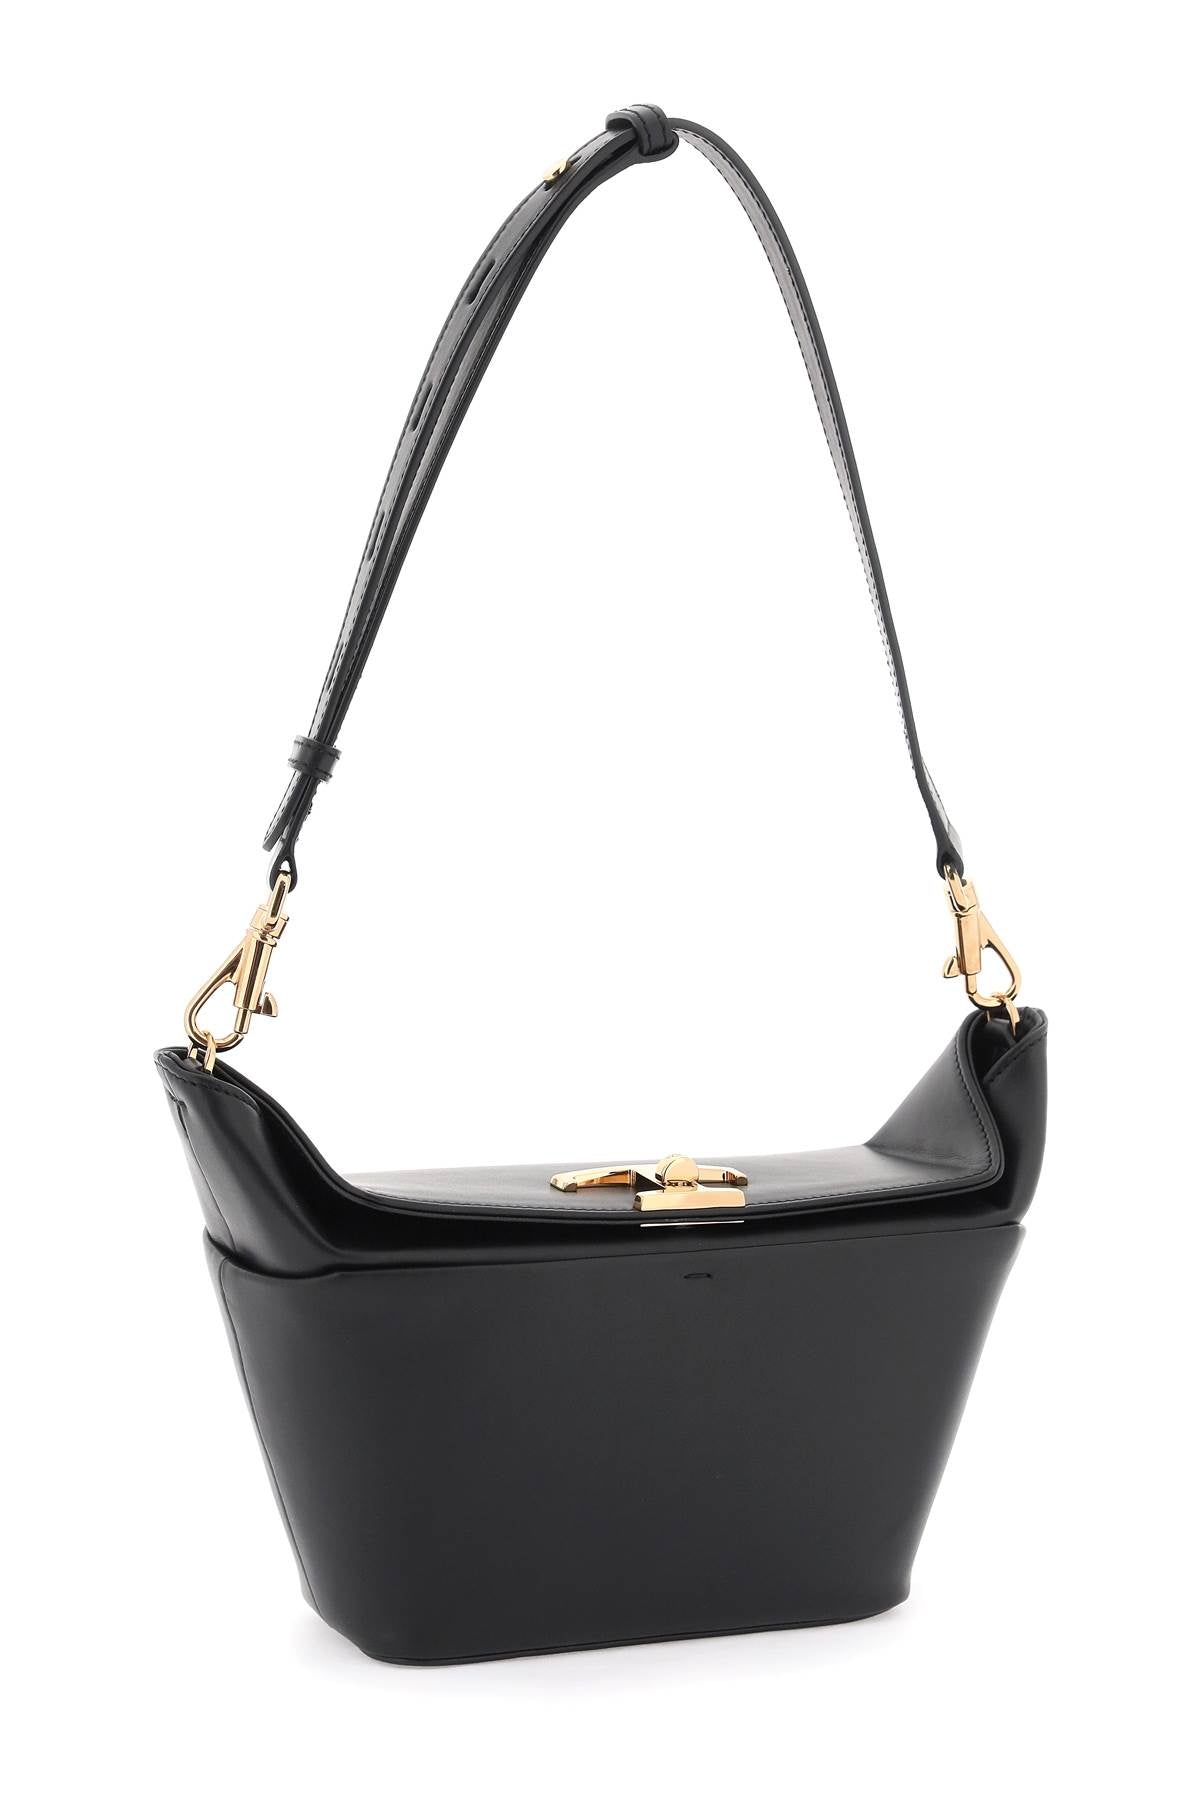 TOD'S Women's Timeless Black Leather Shoulder Bag with Gold Hardware